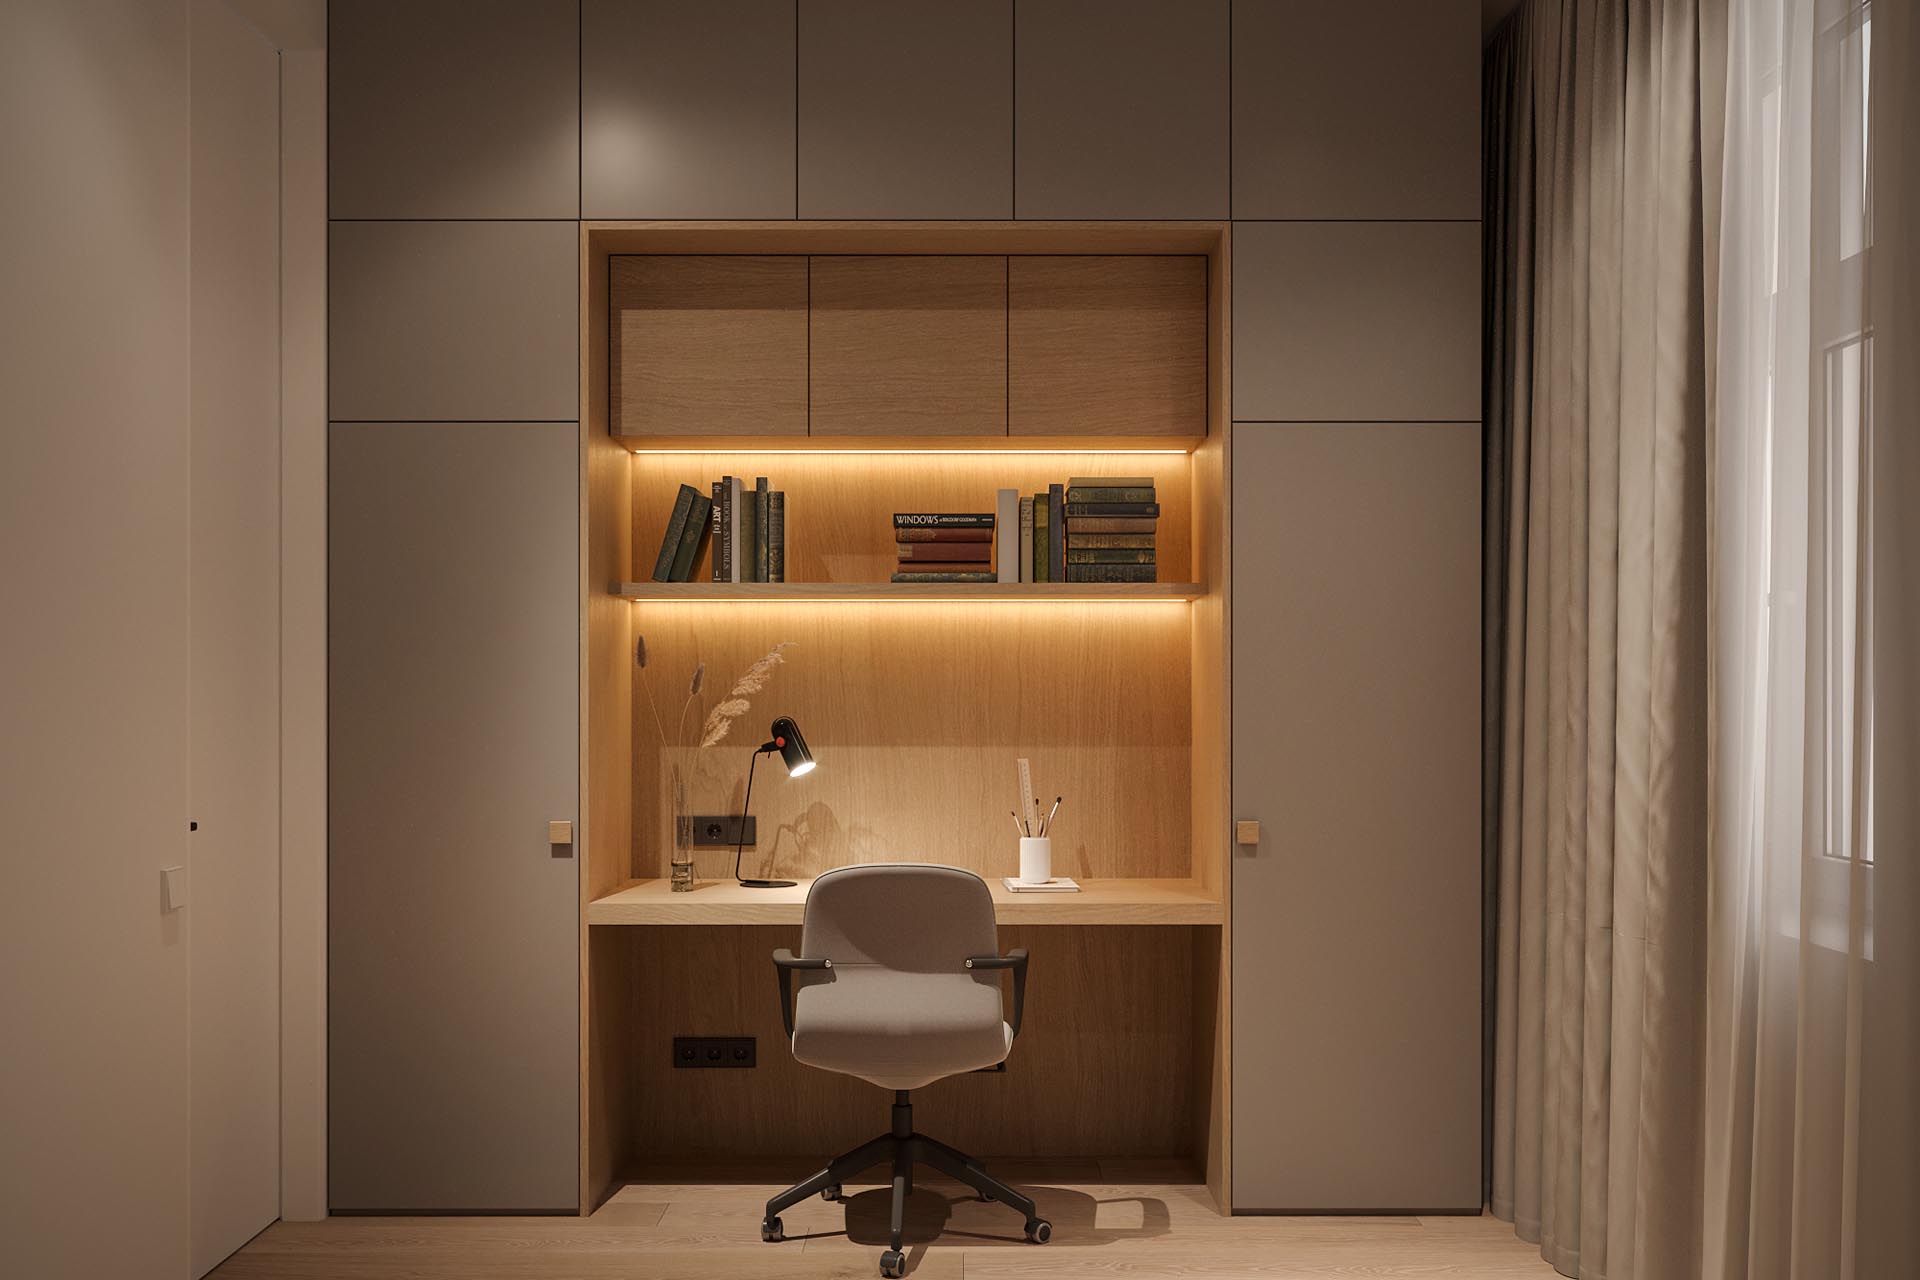 A modern built-in home office surrounded by bookshelves and closets, also has the shelving with hidden lighting.